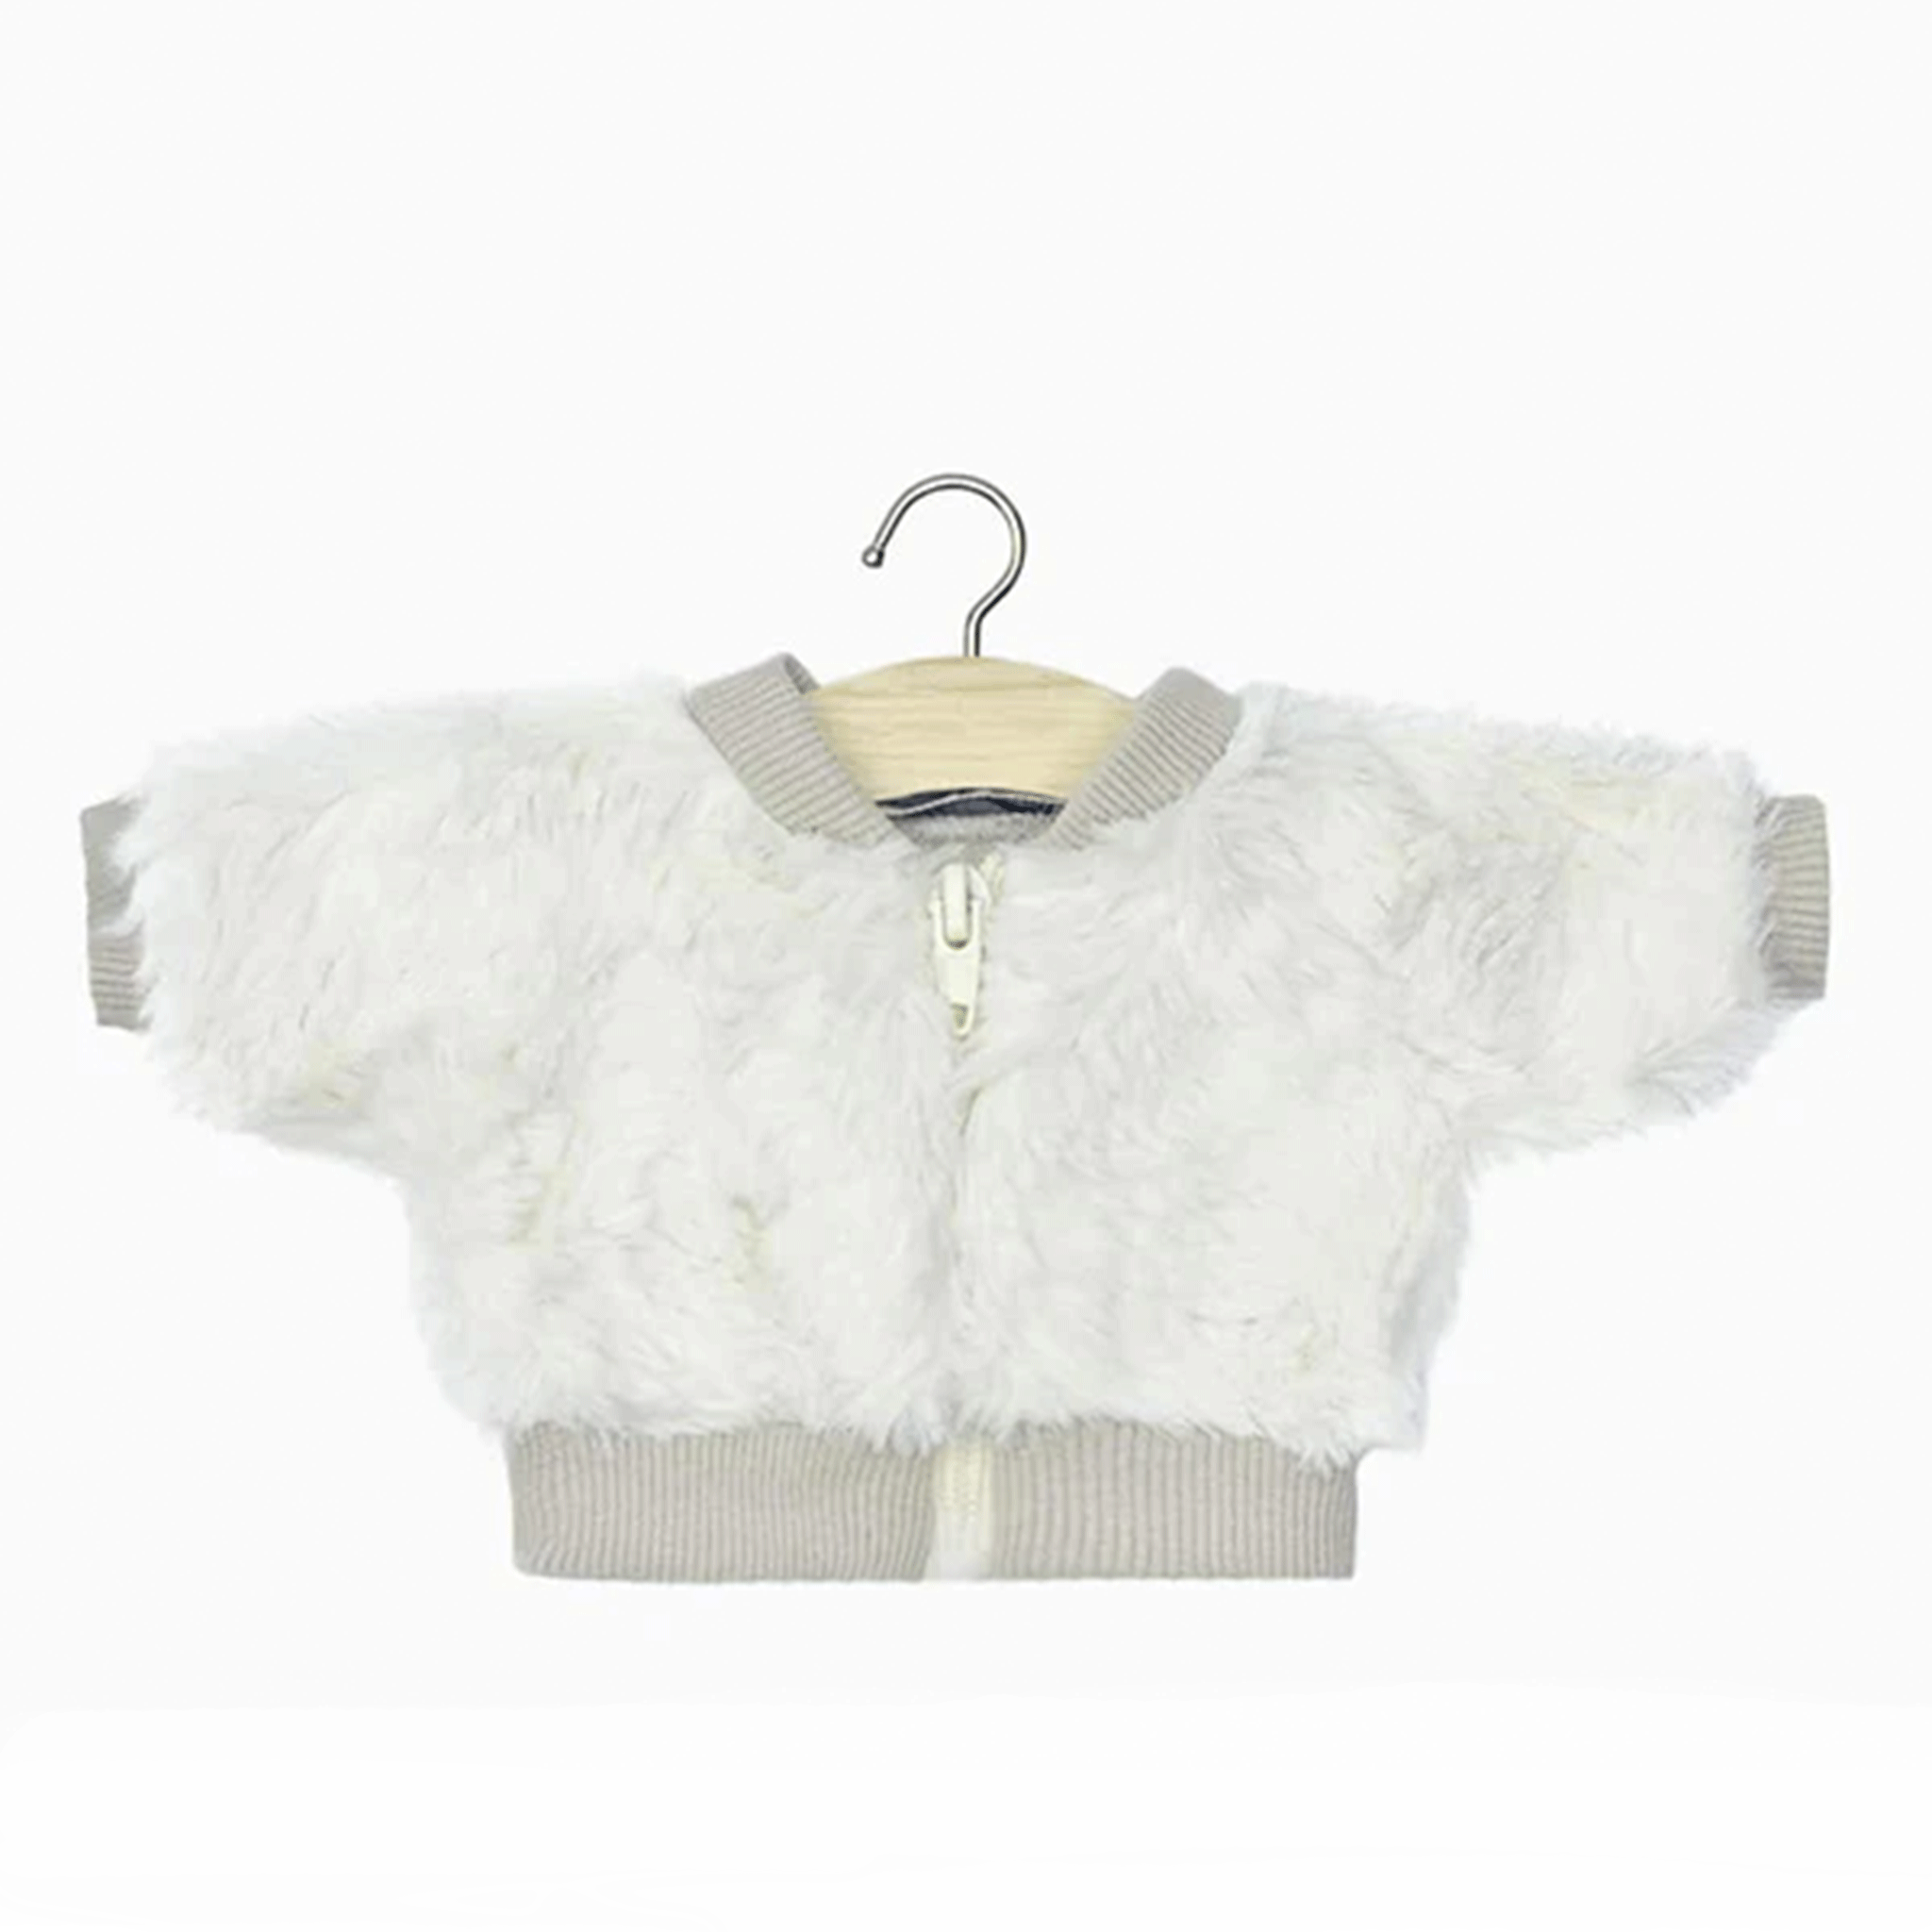 On a white background is a white faux fur jacket for Minikane dolls hung on a wood hanger. 